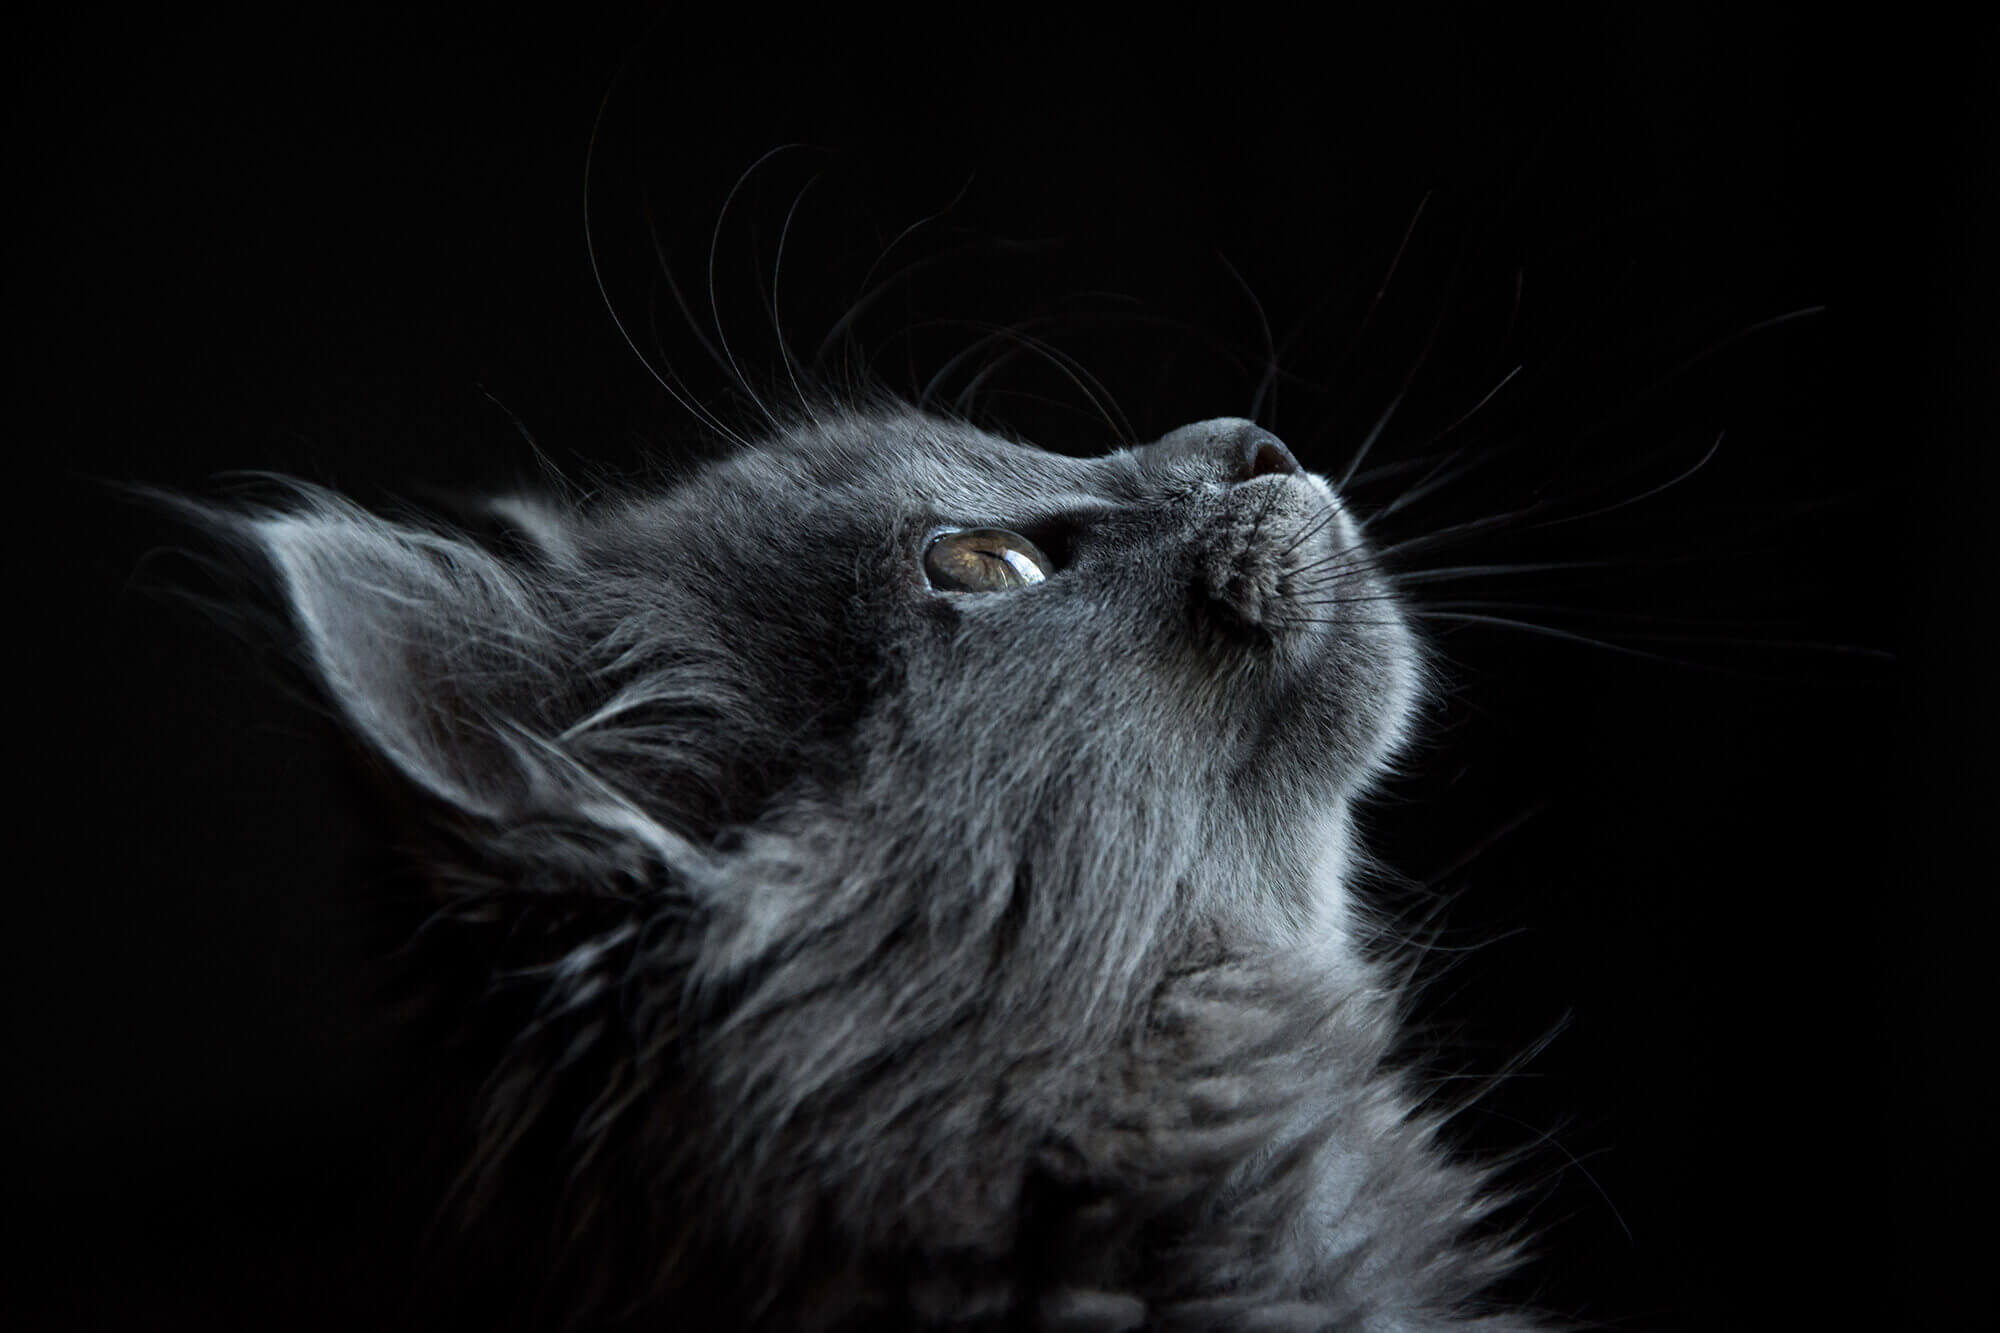 This example flips an image of a cat in the dark horizontally and changes the direction of its stare from right to left. (Source: Pexels.)